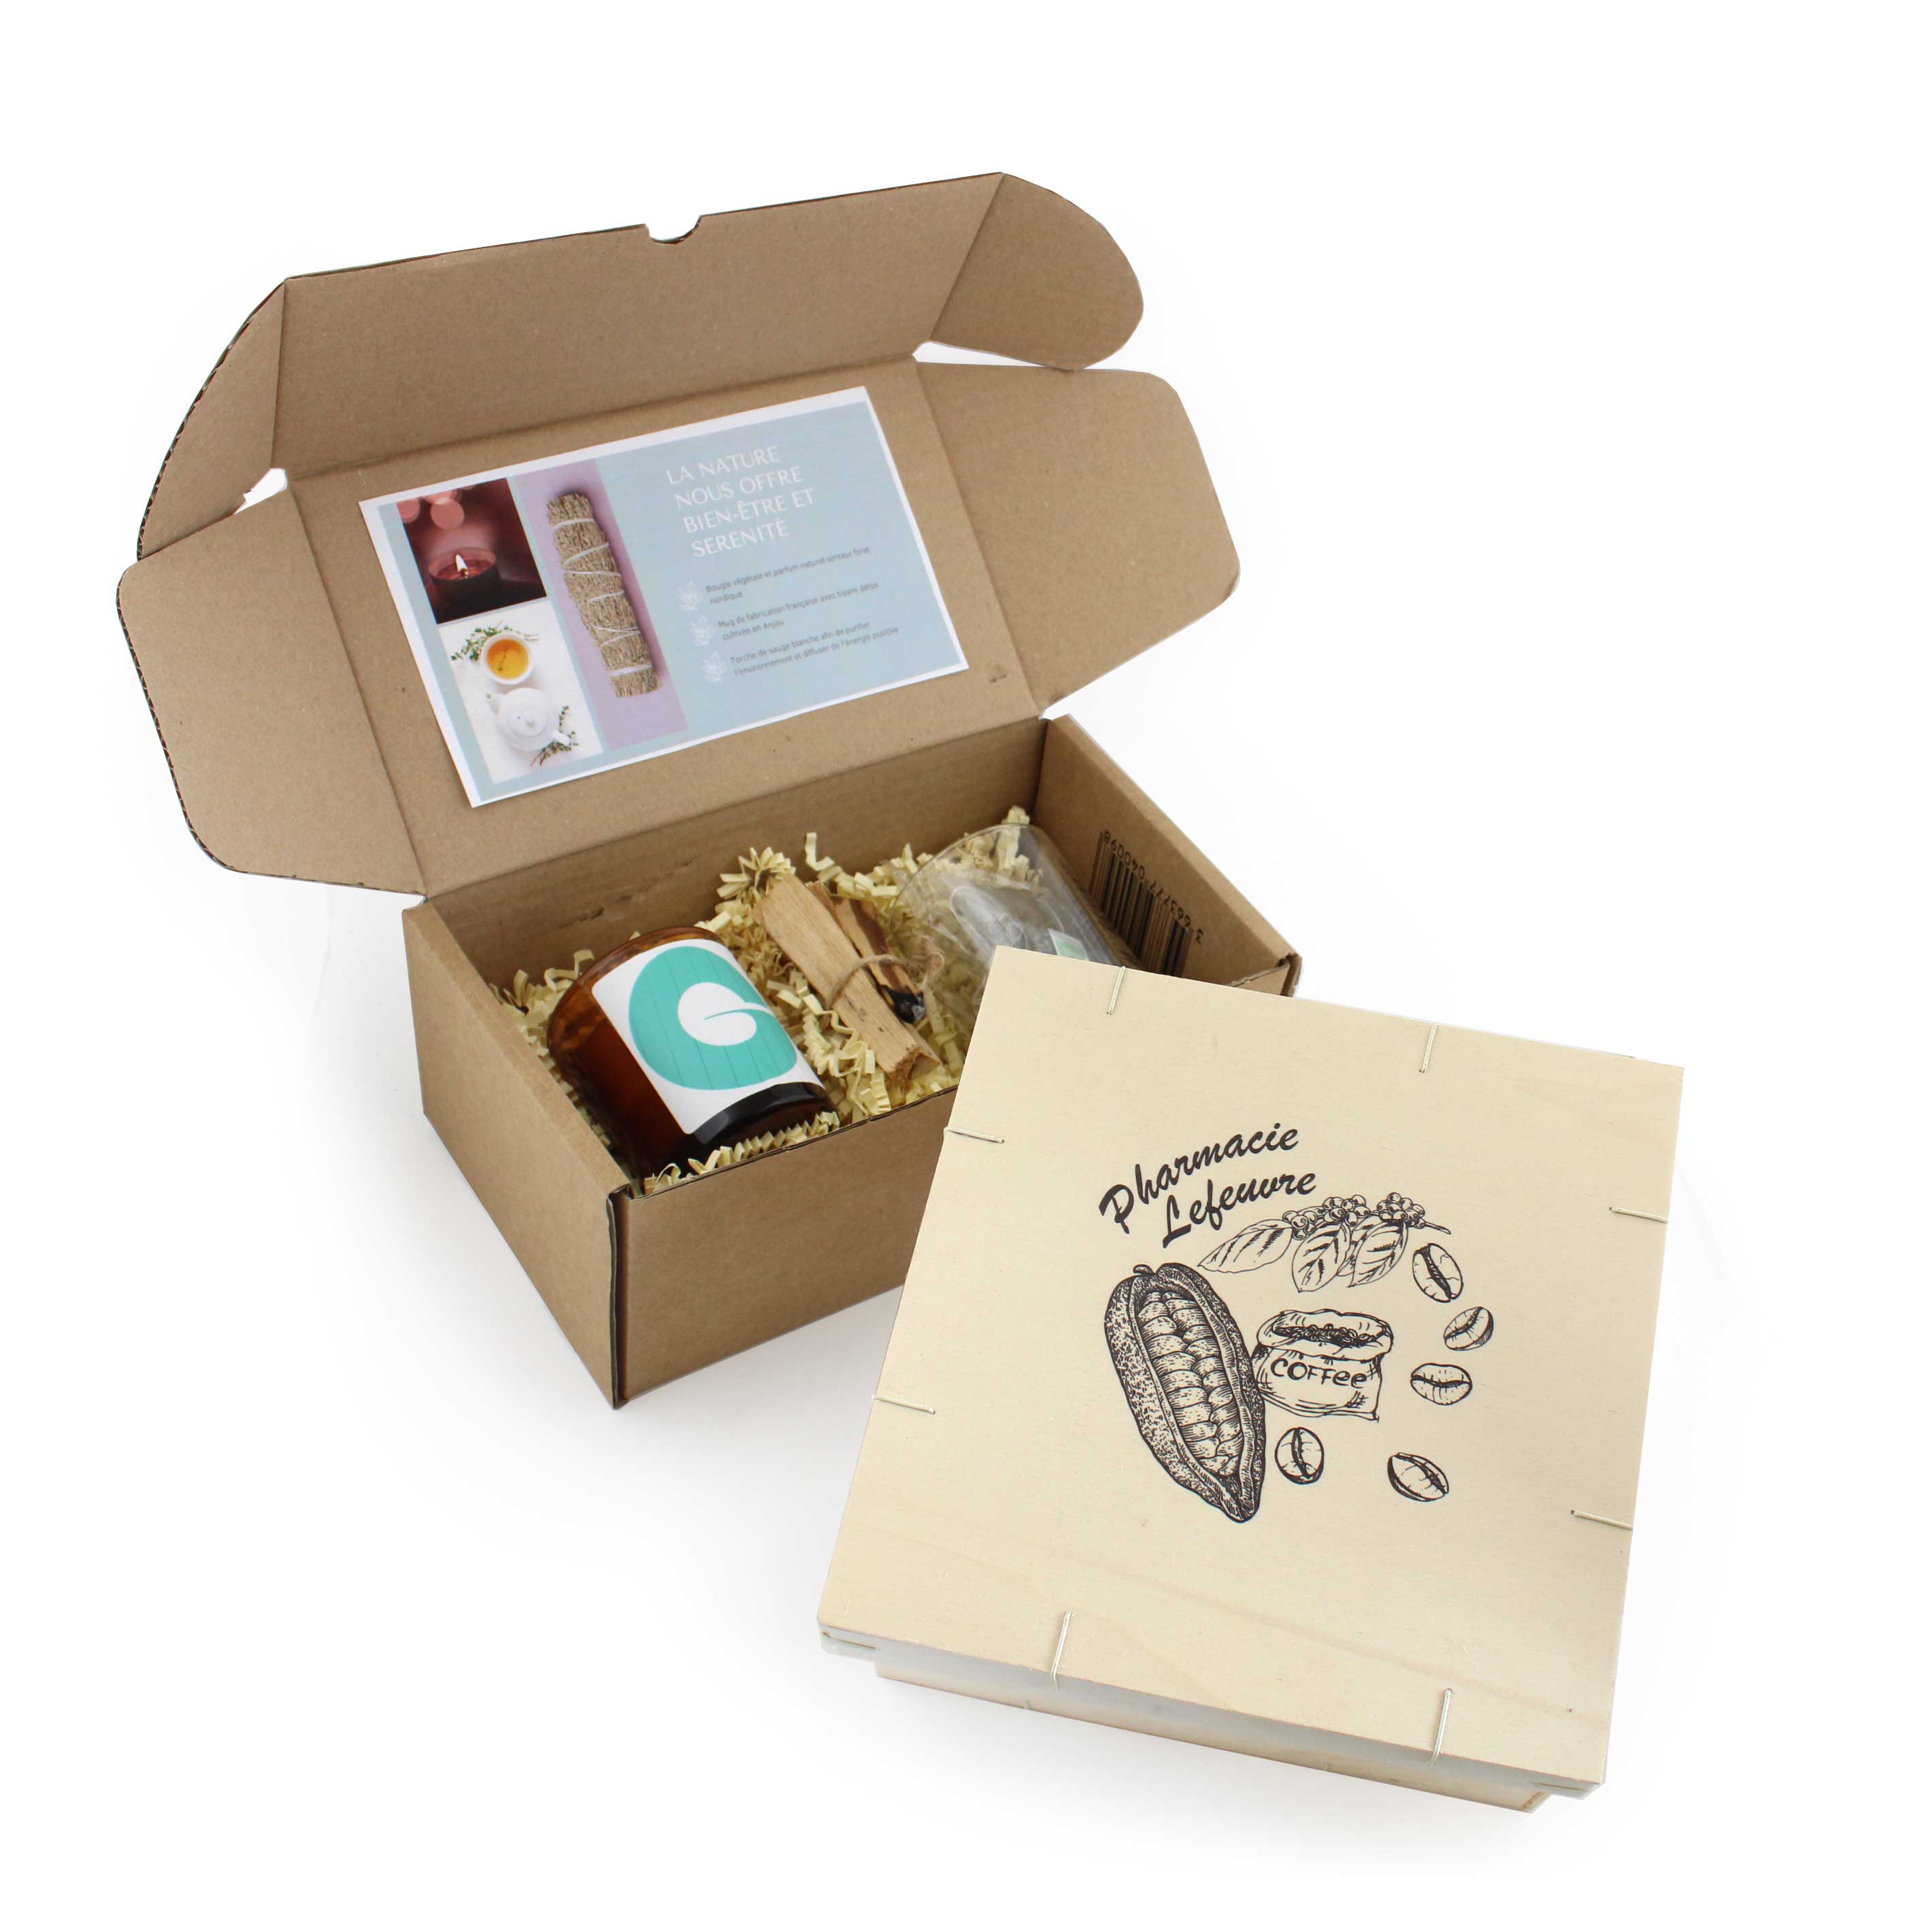 The new Idées Nature boxes, a well-being gift